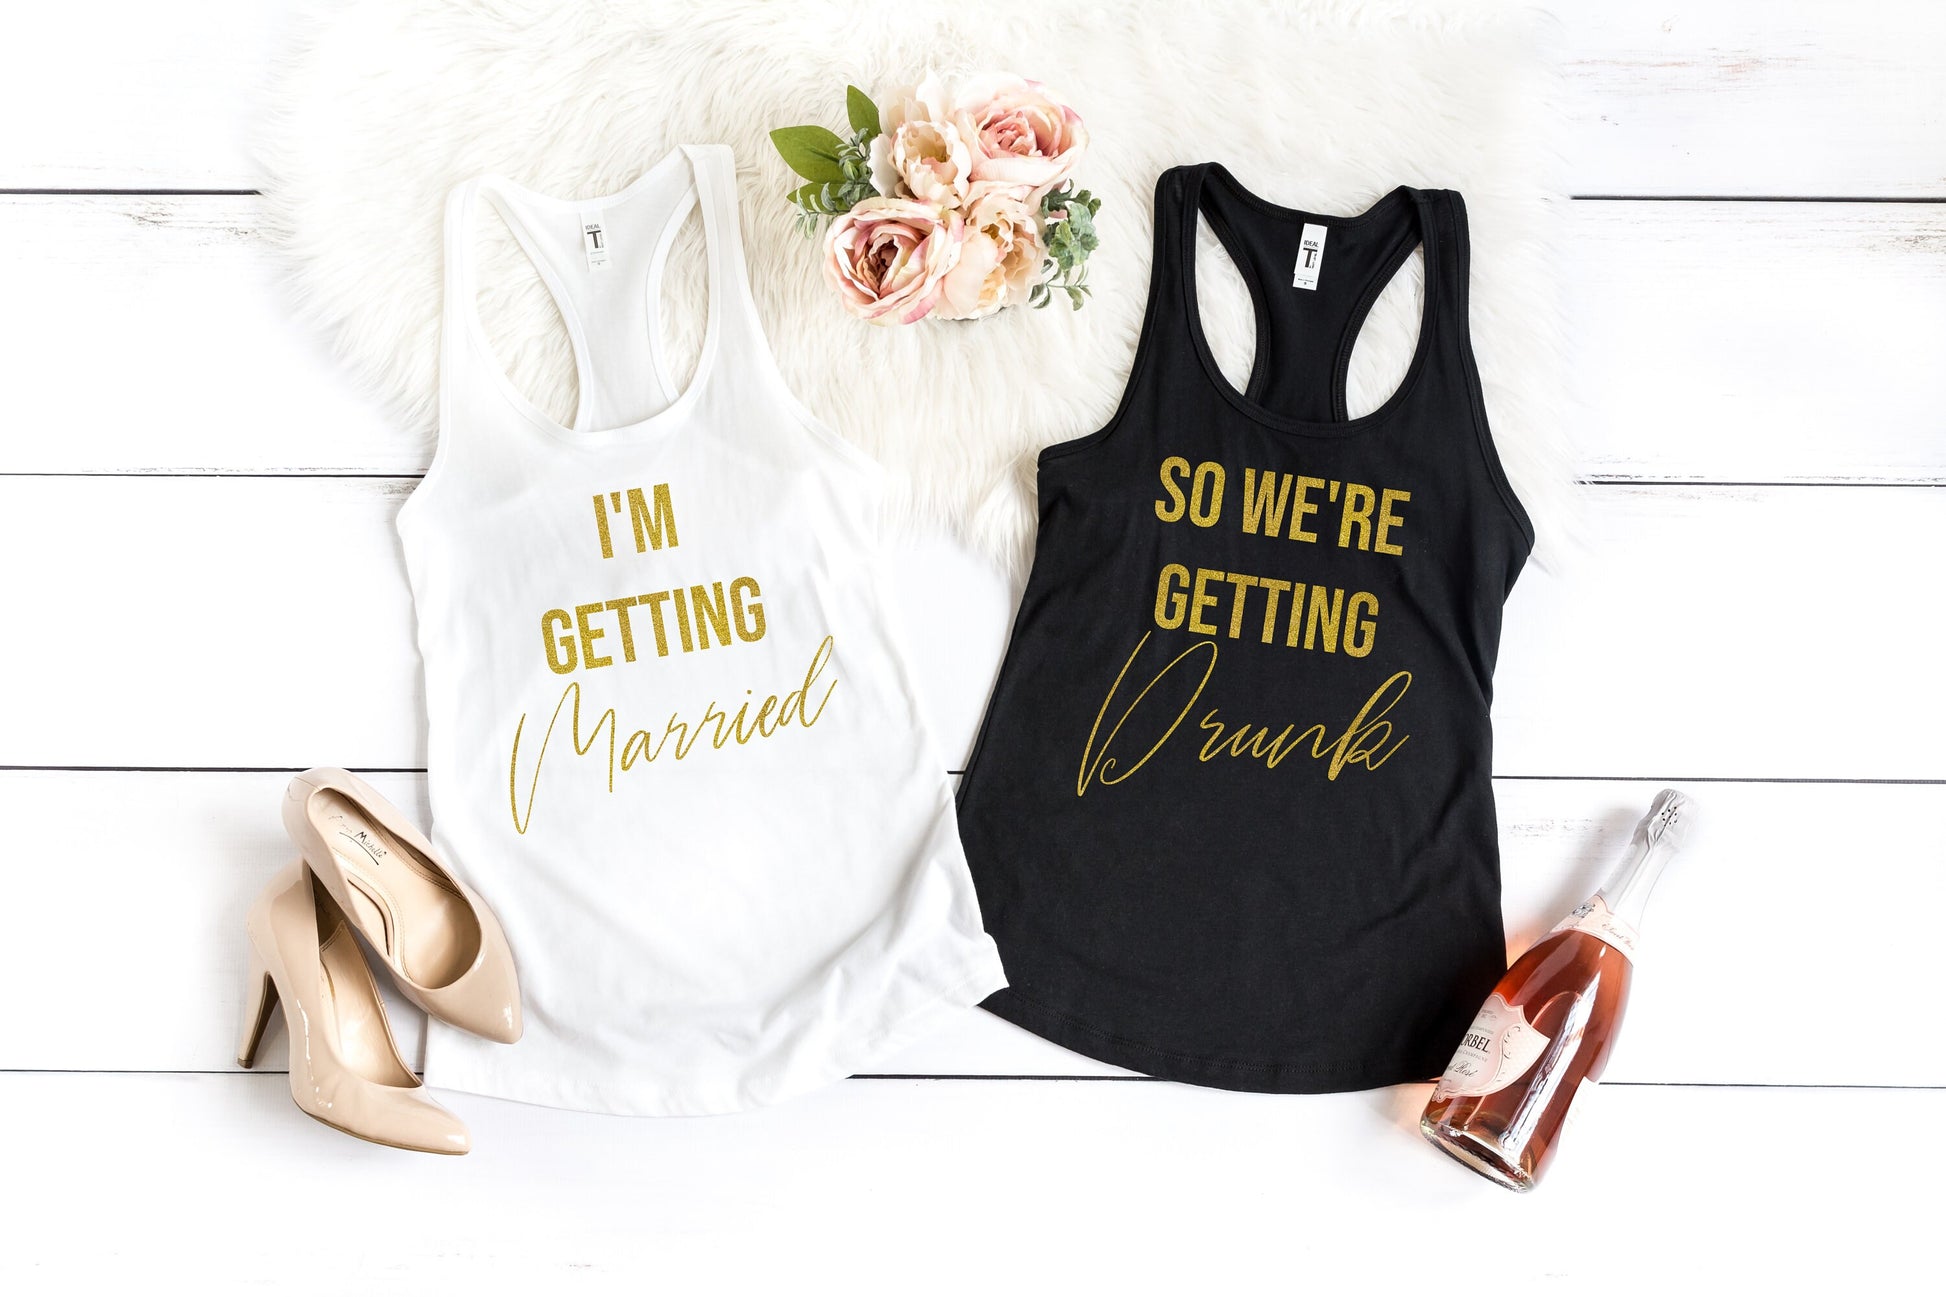 I'm Getting Married So We're Getting Drunk Women's Bachelorette Party Tank Tops - Black and Gold Wedding - bachelorette matching tanks